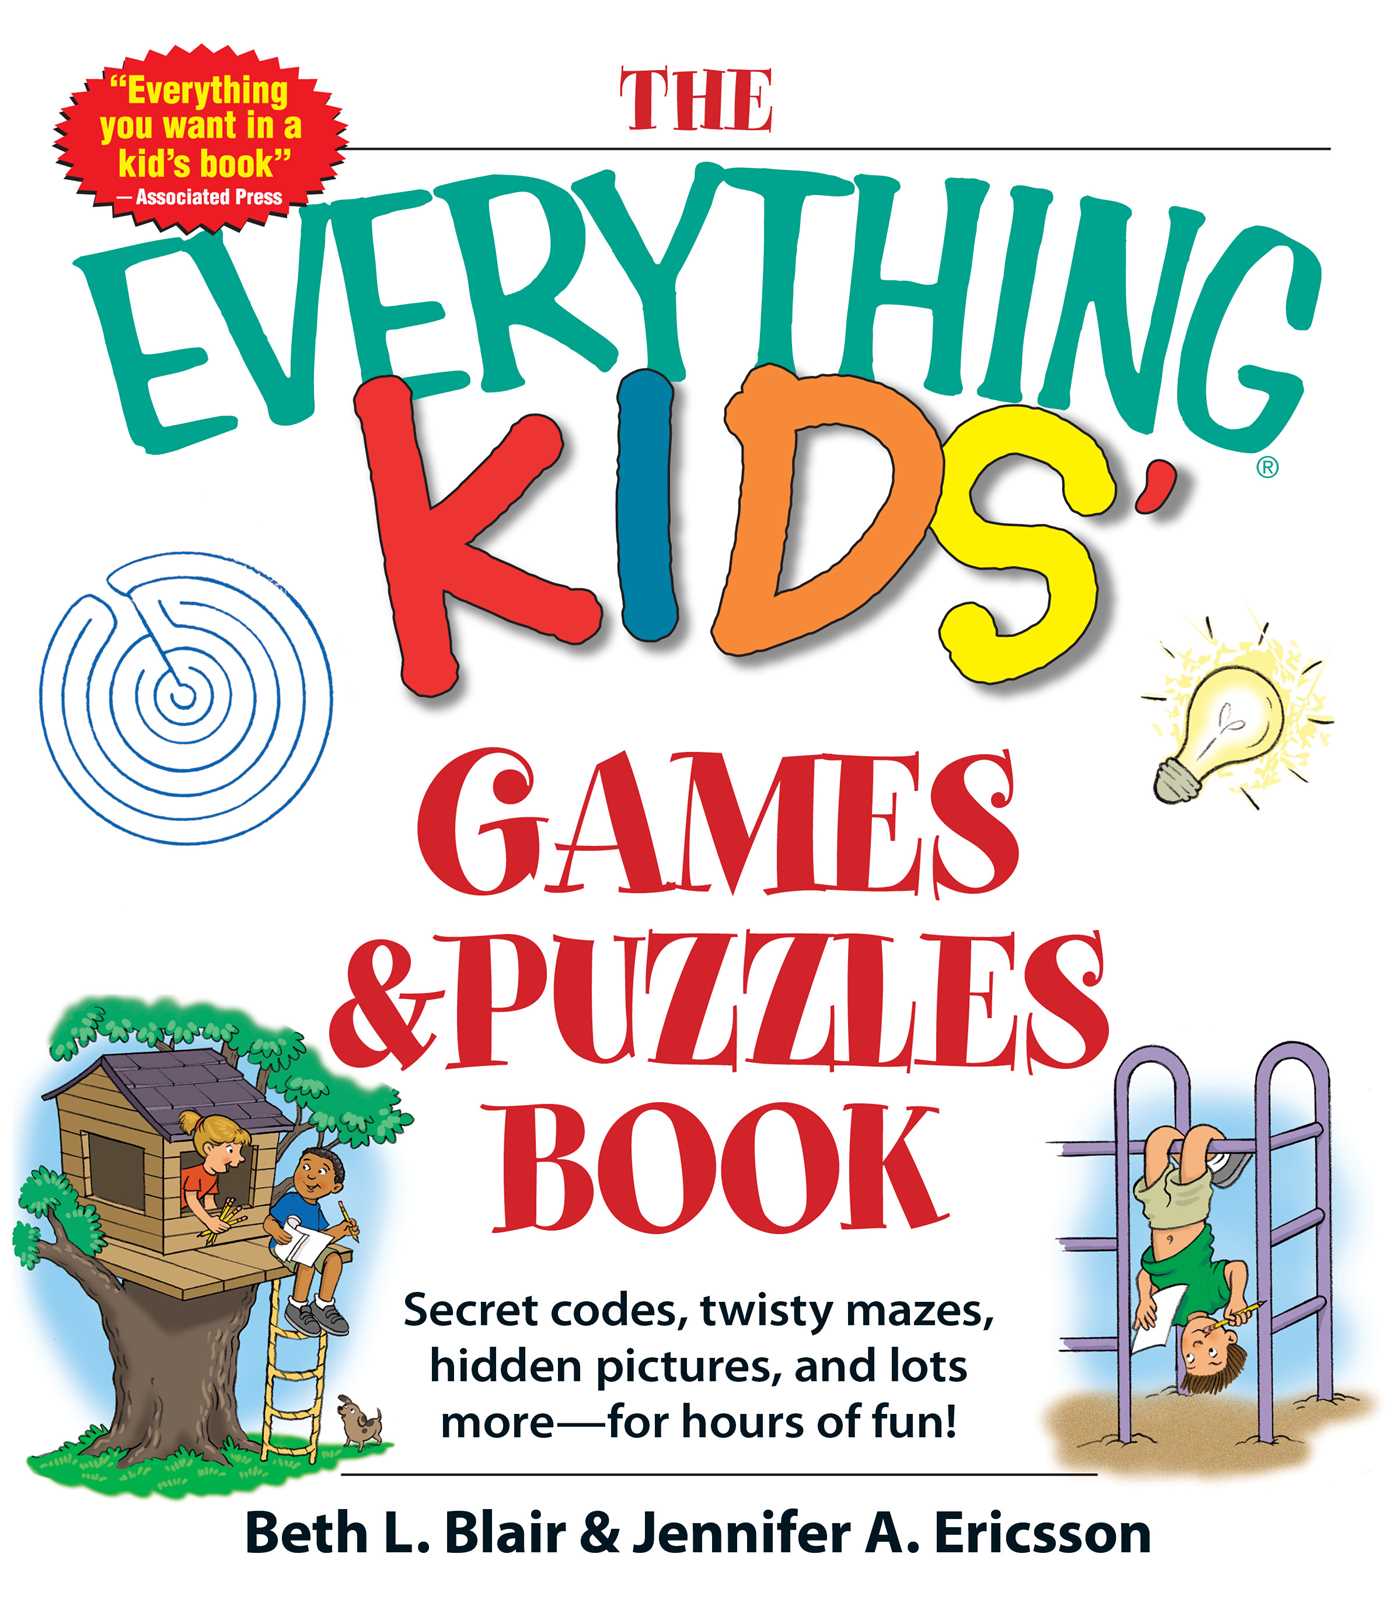 Picture of The Everything Kids' Games & Puzzles Book